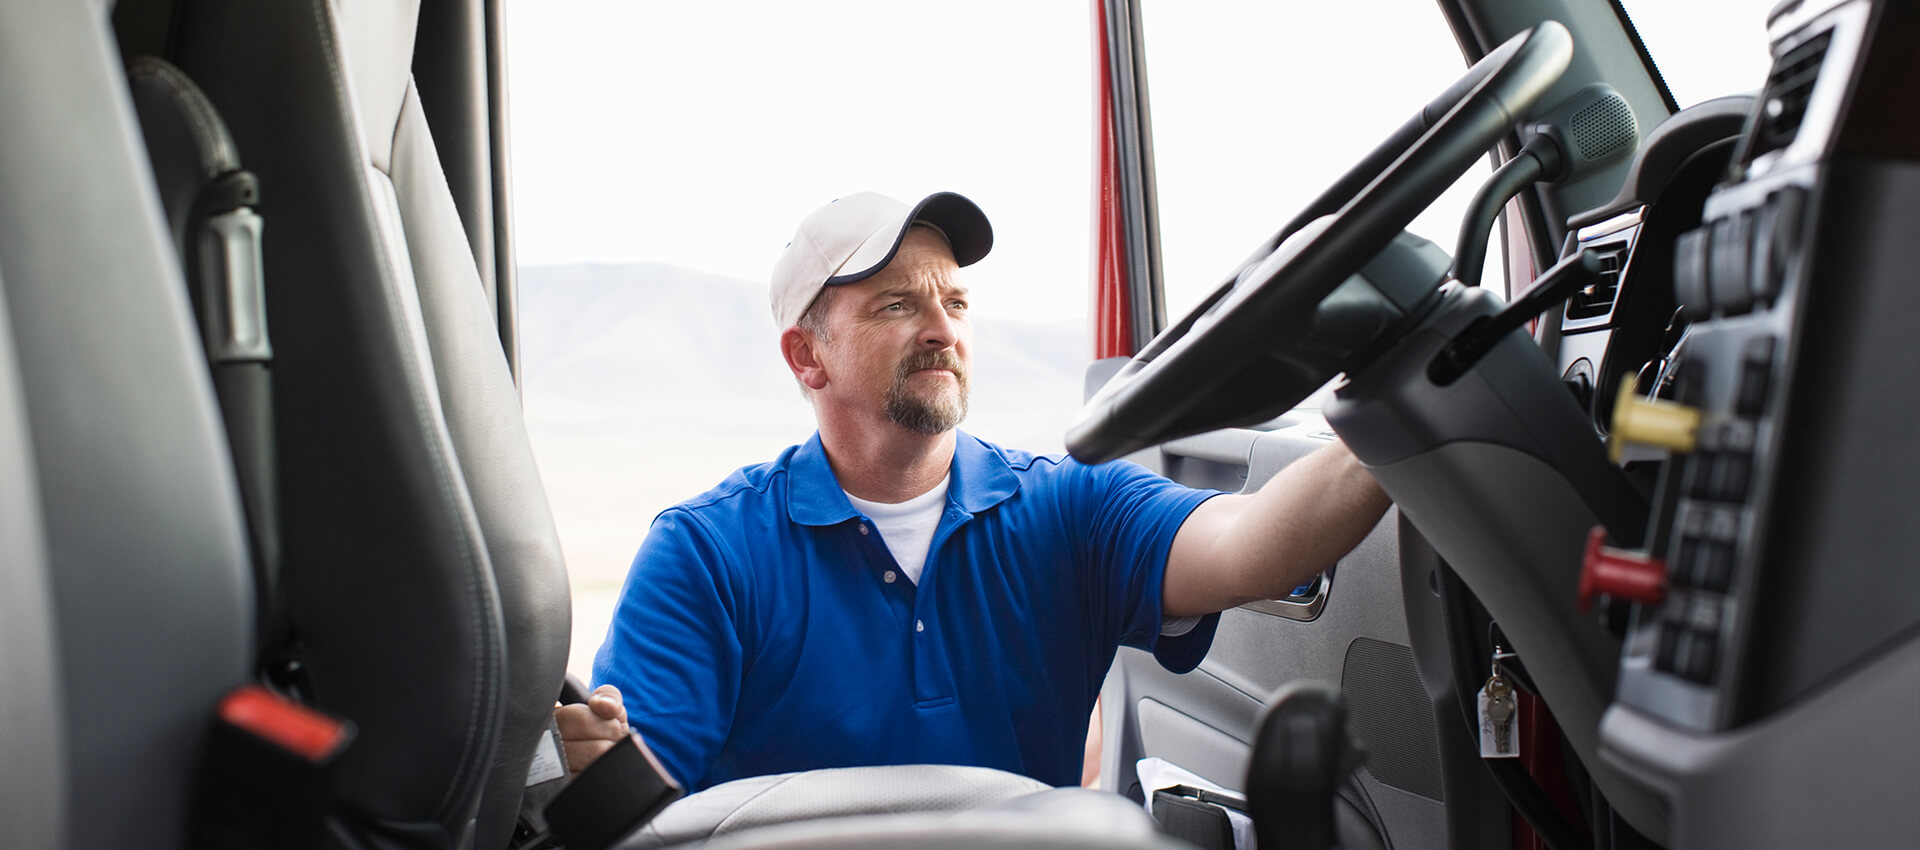 Commercial Truck Driving, What You Need To Know